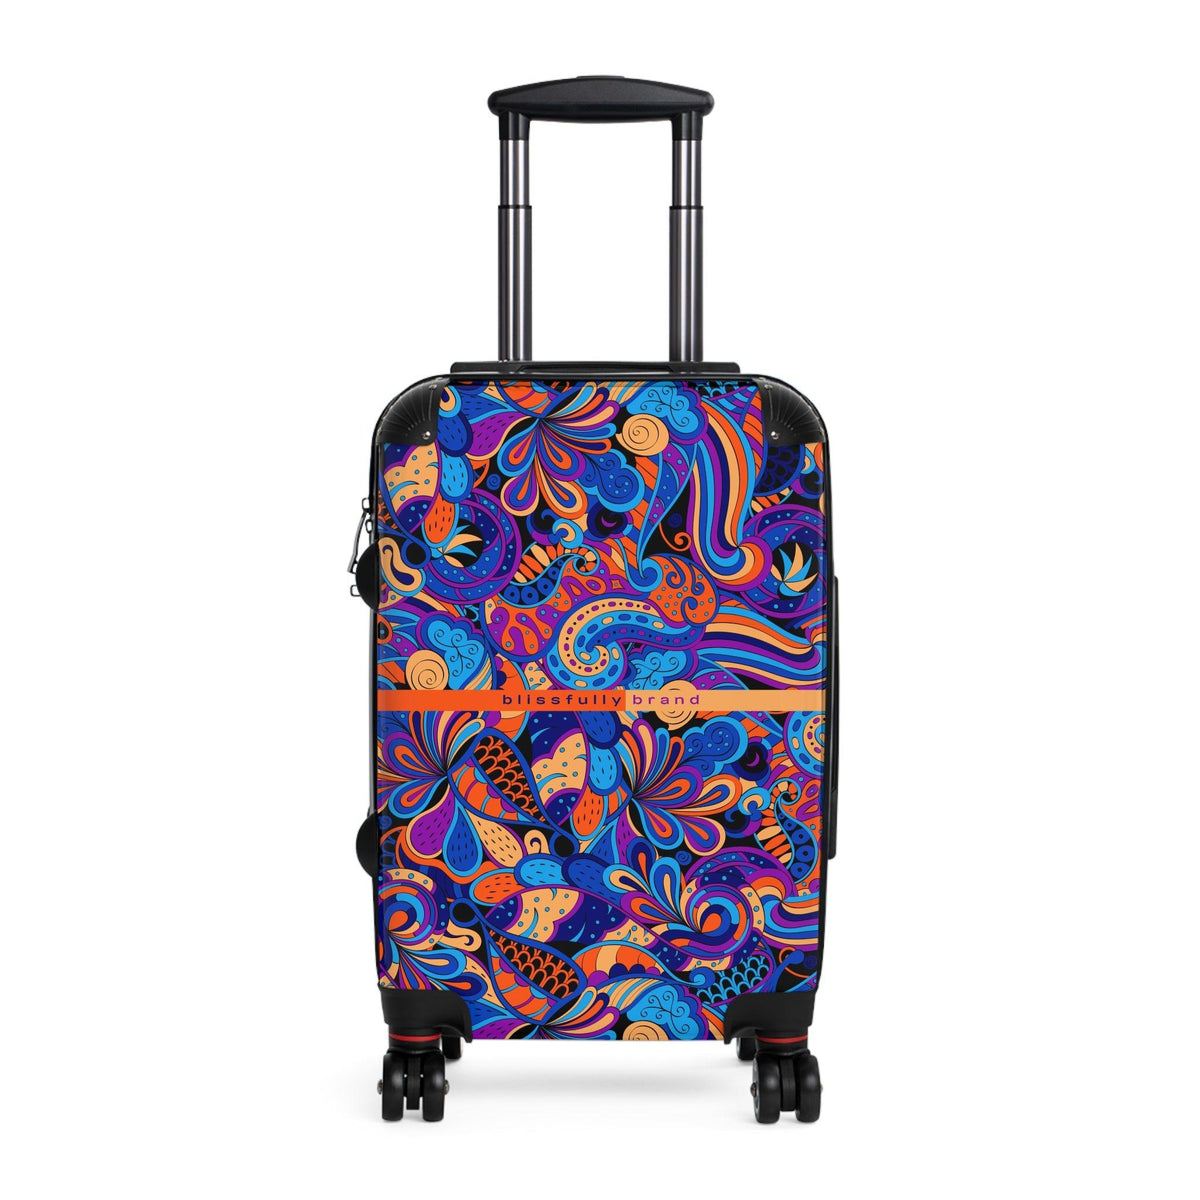 Jina Luggage Collection - Abstract Kaleidoscope Paisley Floral Print Psychedelic Retro Swirls Funky Multicolor Check in Carry On Roller 360 Hard Shell Unique Retro Vibrant Bold Blue Orange